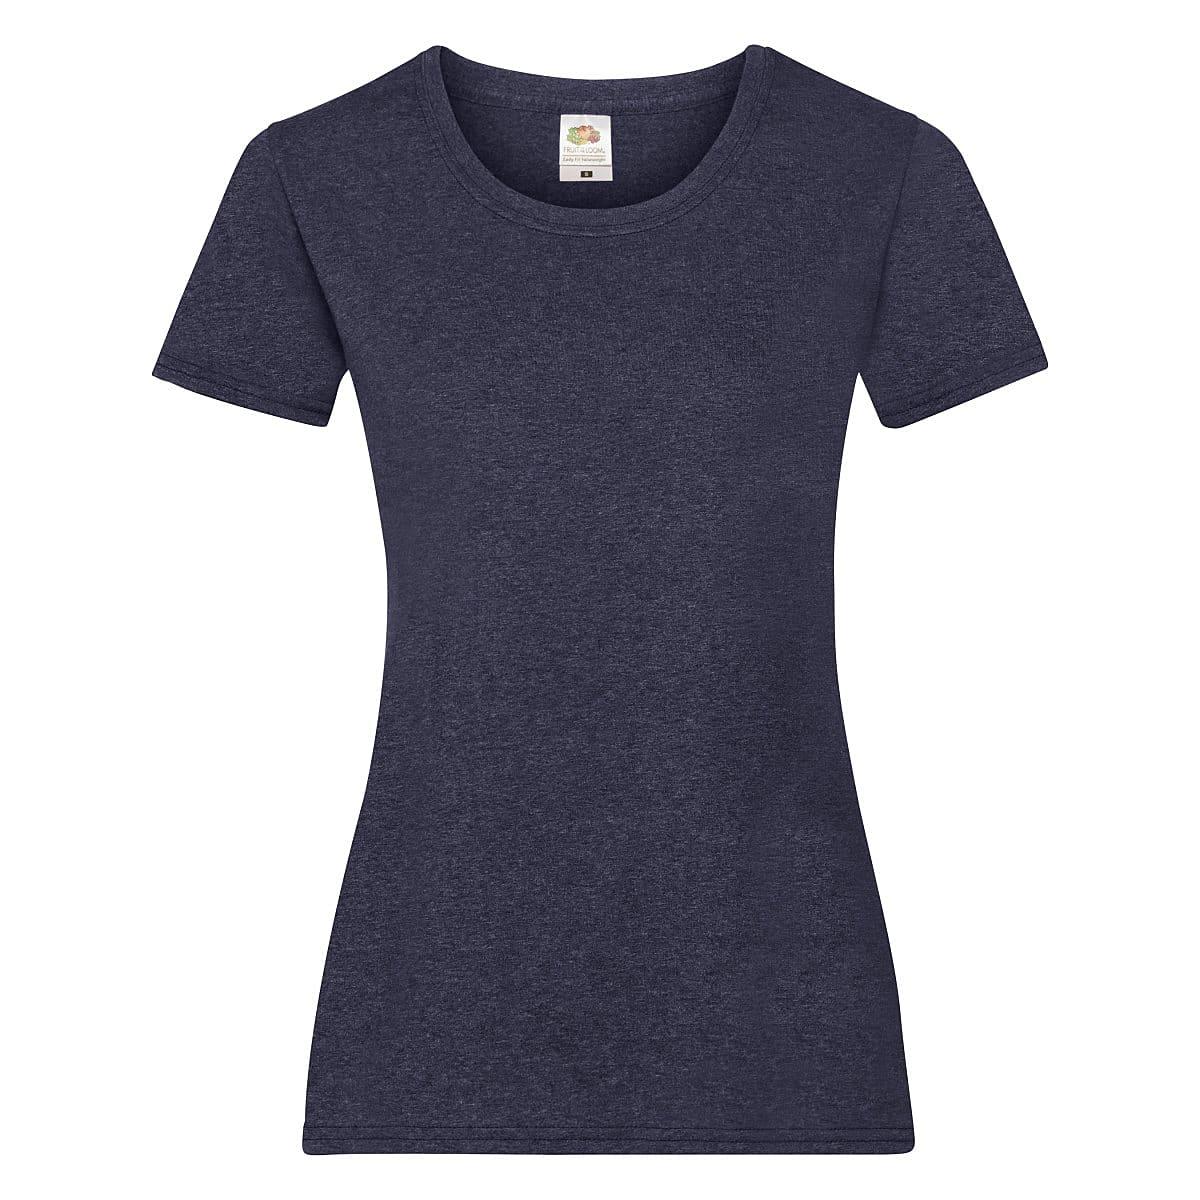 Fruit Of The Loom Lady-Fit Valueweight T-Shirt in Vintage Heather Navy (Product Code: 61372)